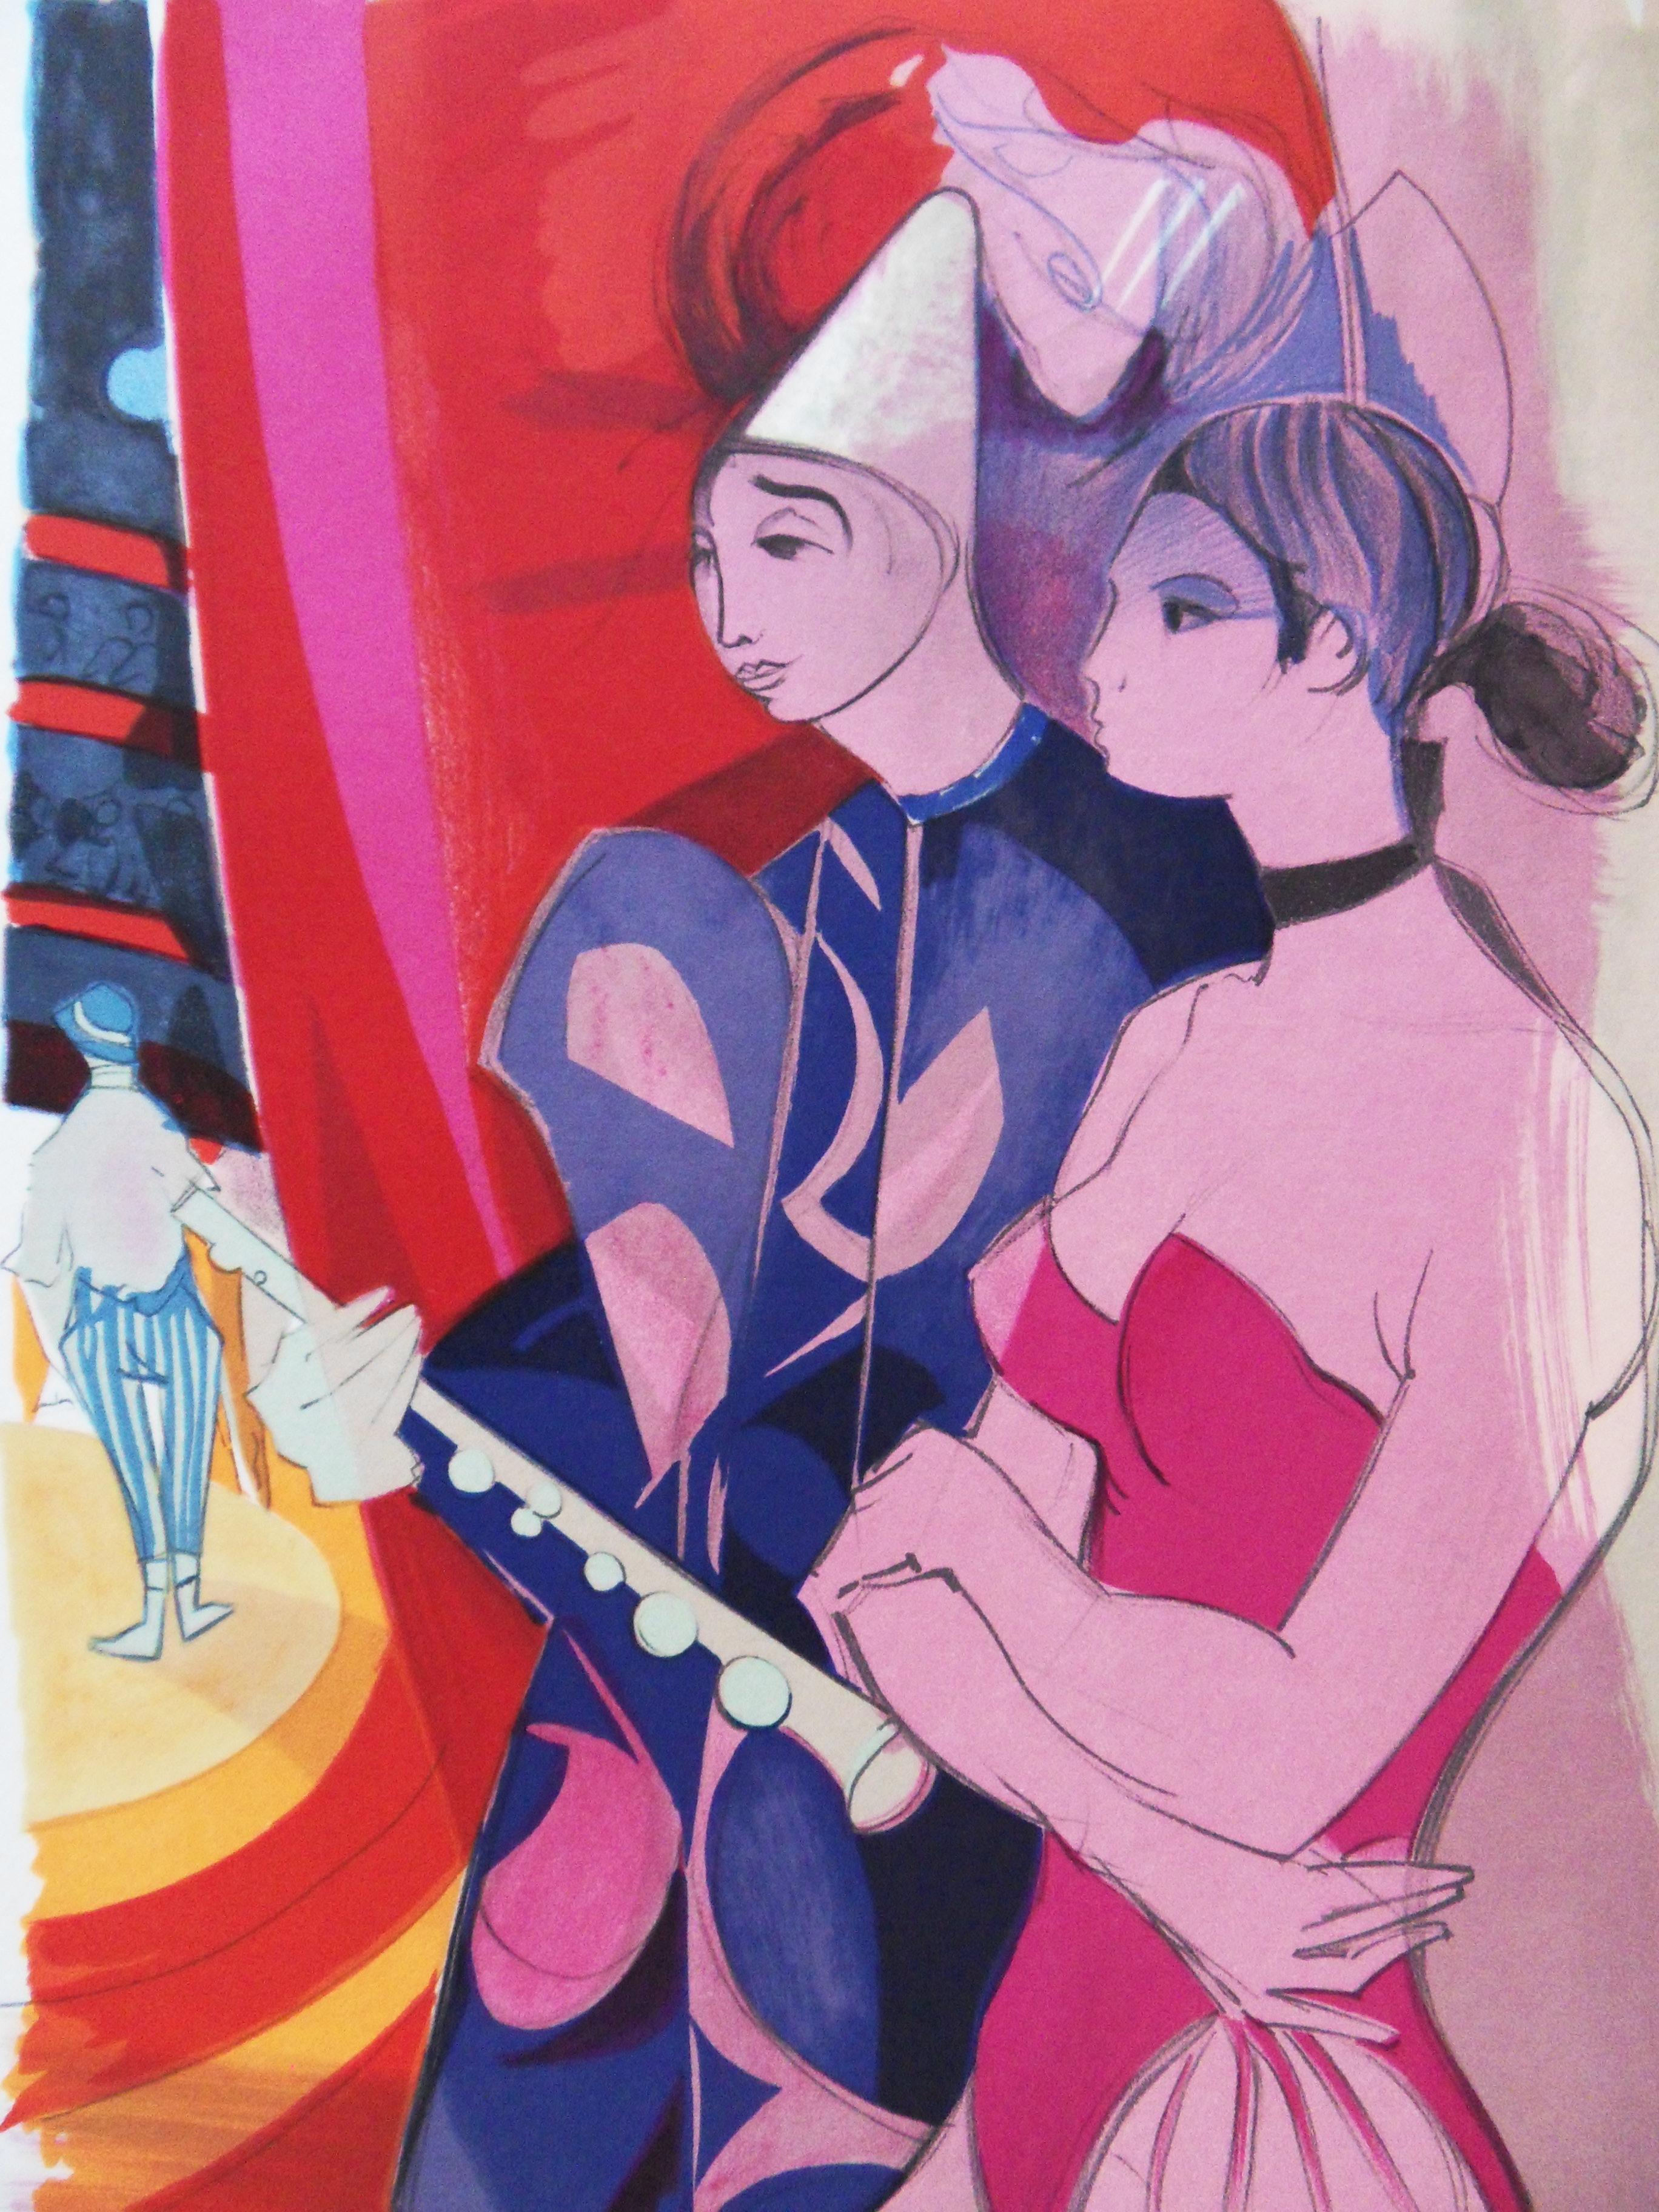 Circus : Pierrot Clown and Acrobat - Original handsigned lithograph - Print by Camille Hilaire